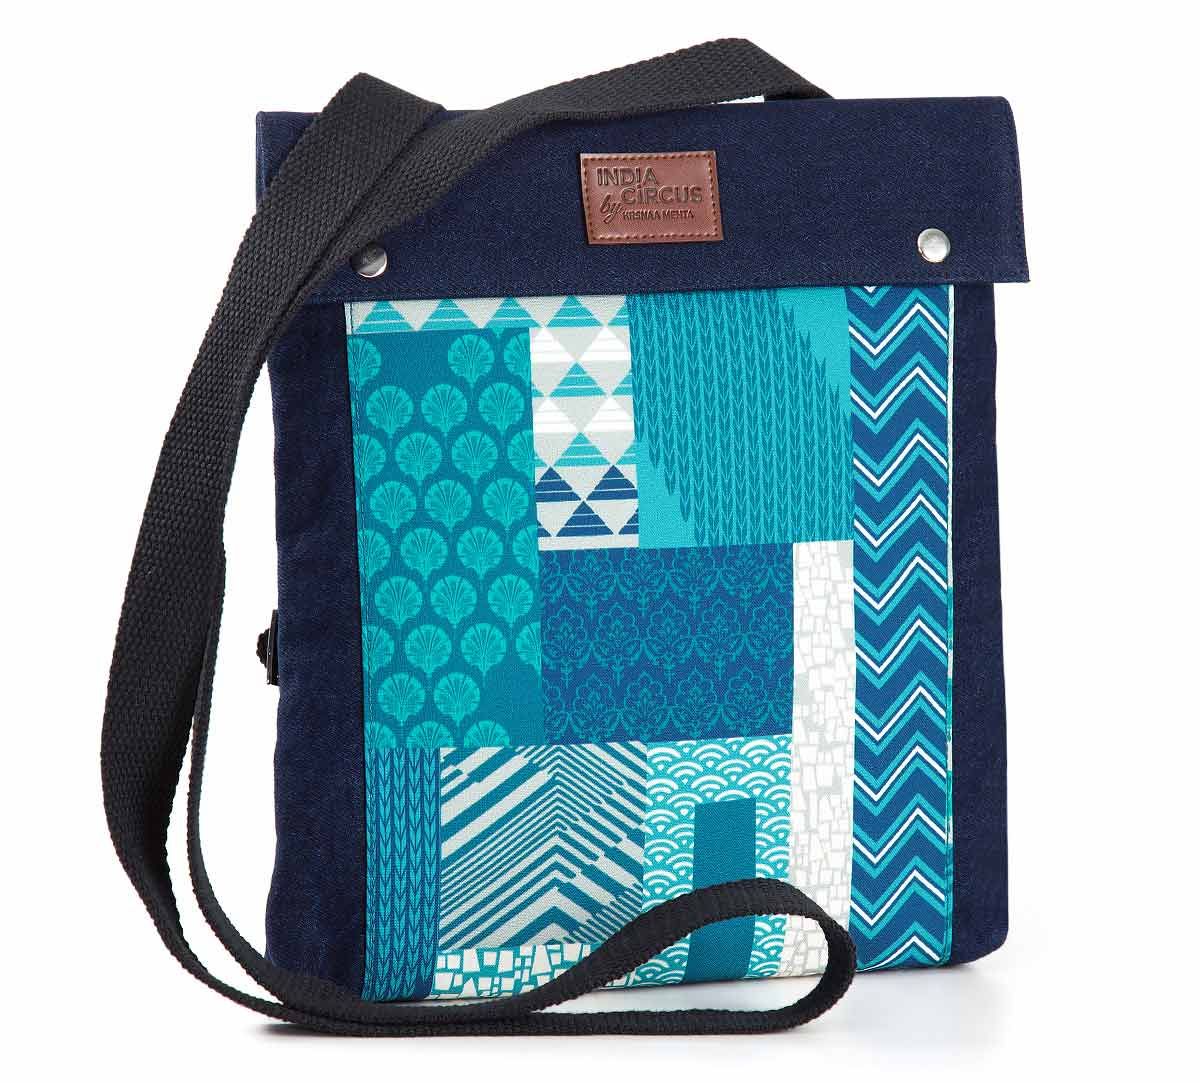 India Circus Design Assembly Sling Denim Backpack